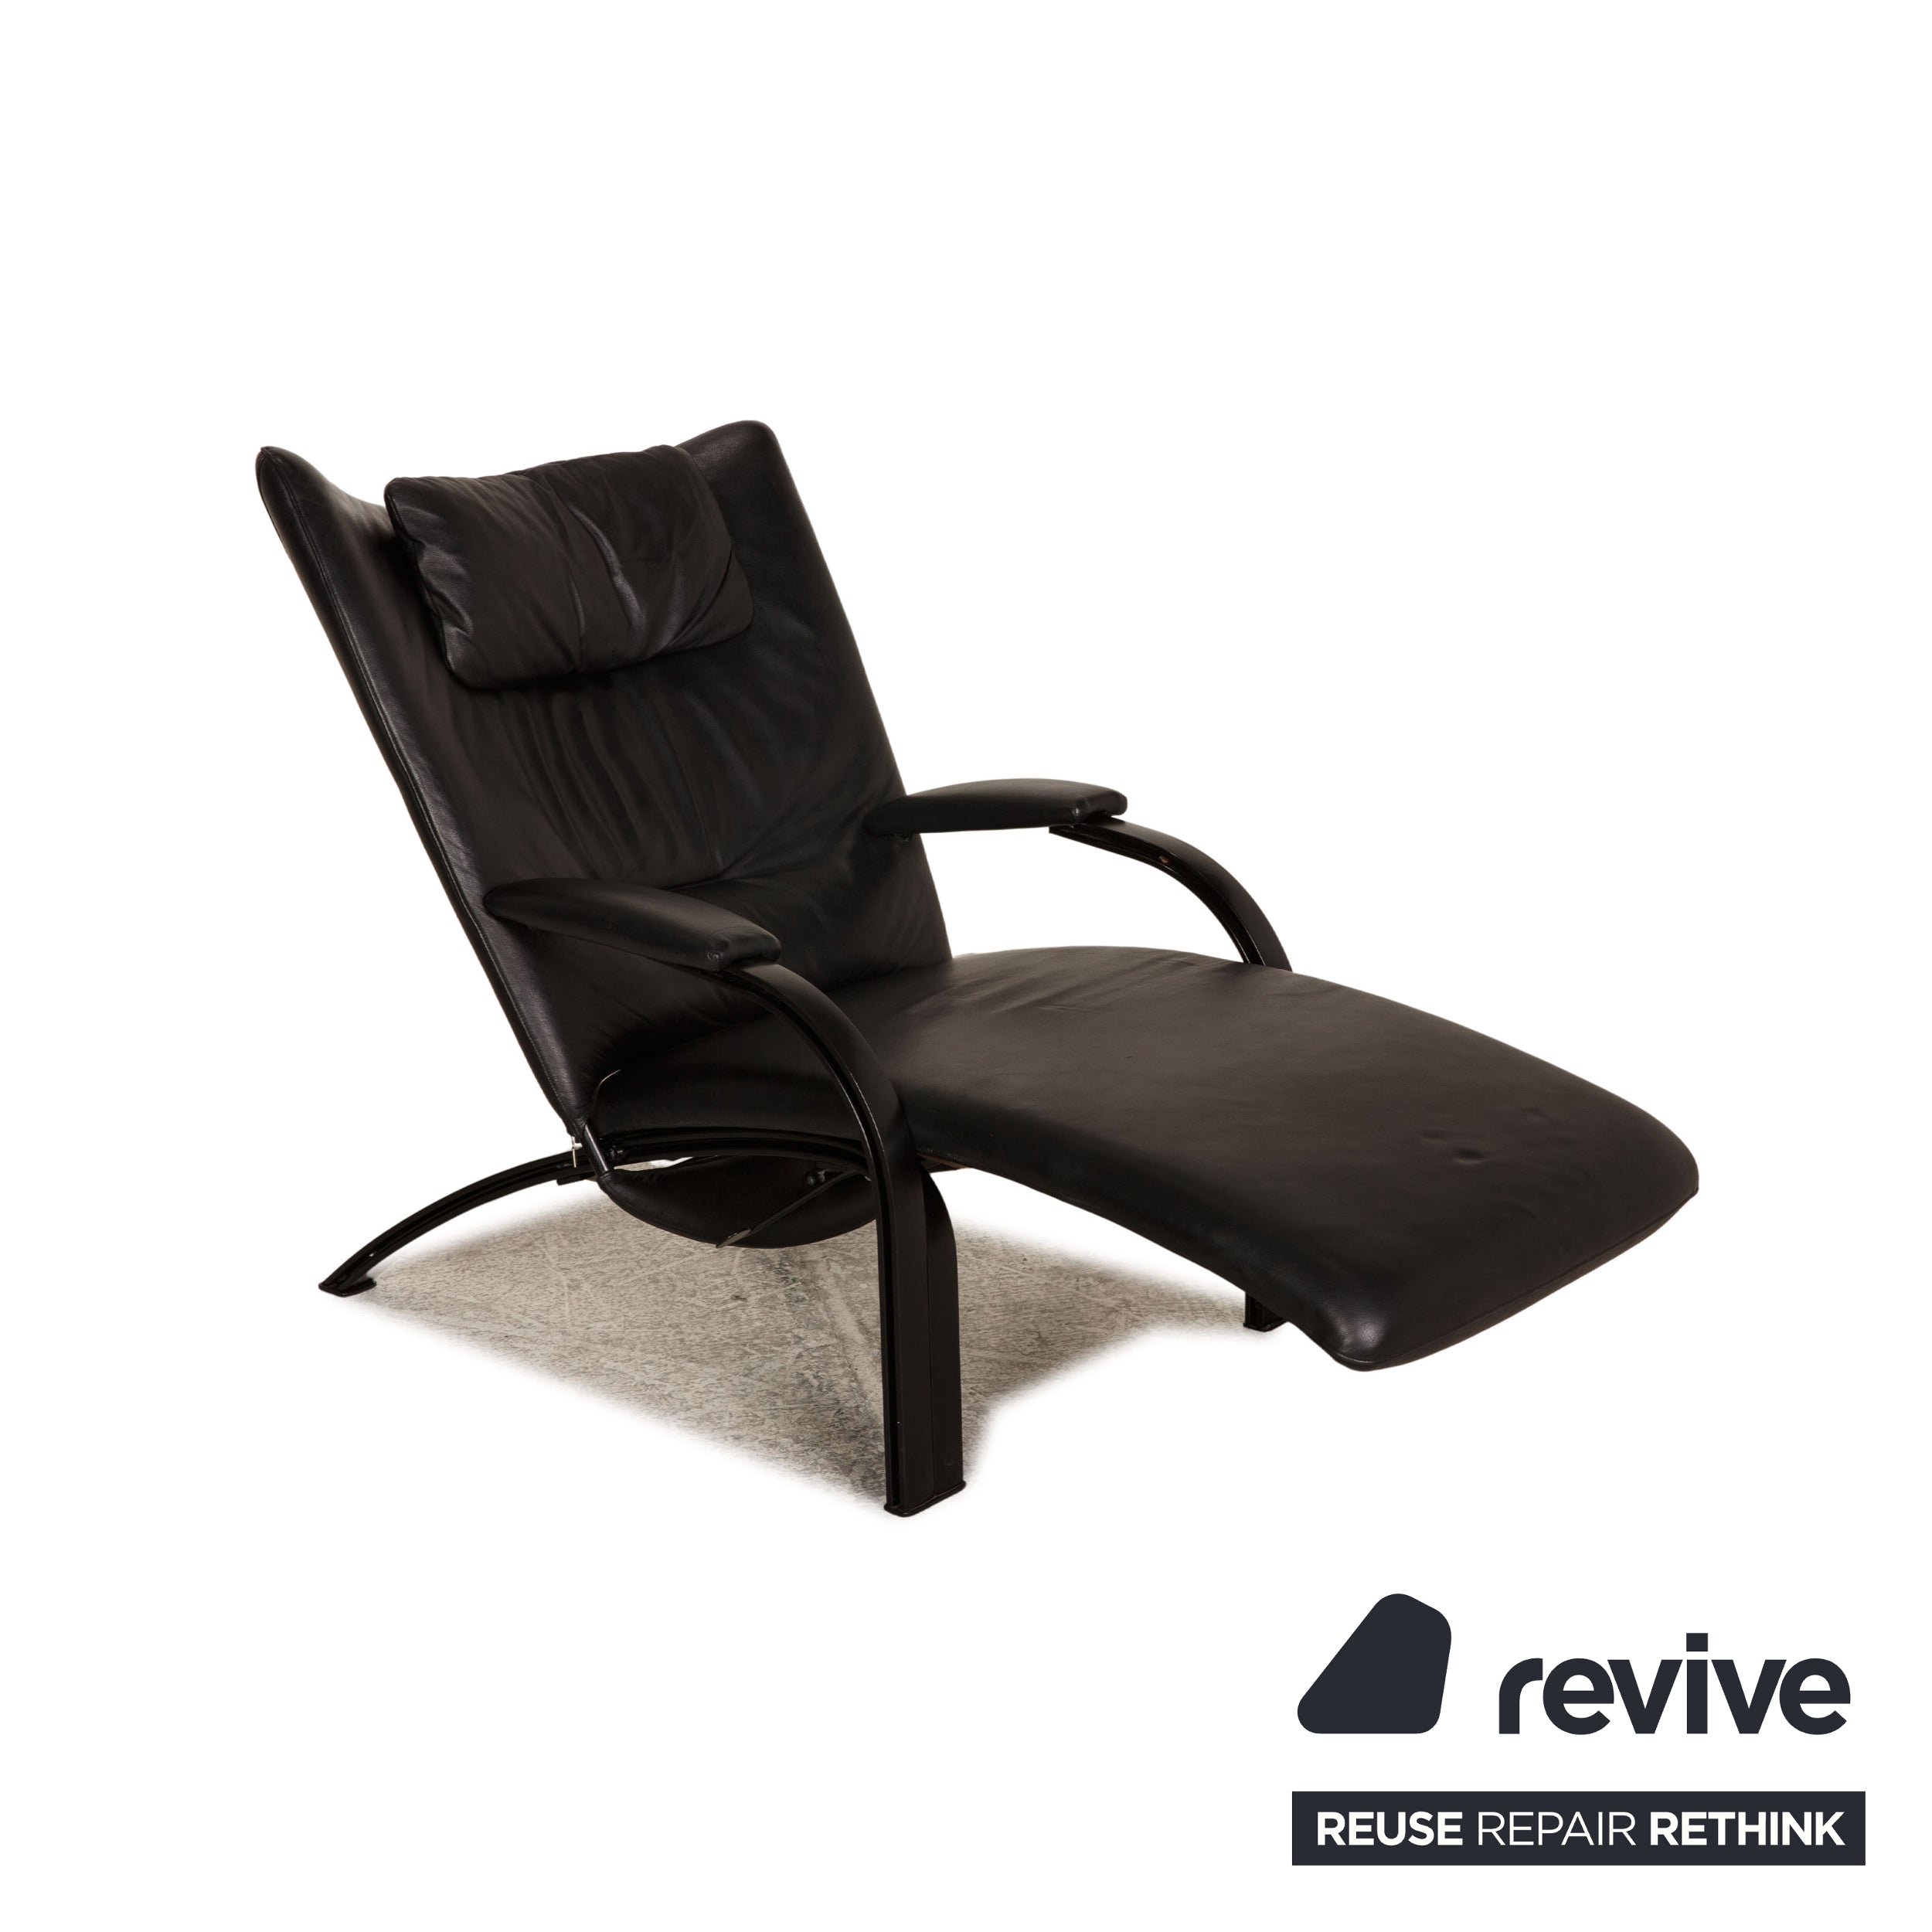 WK Wohnen Spot 698 Leather Armchair Black Function relax function